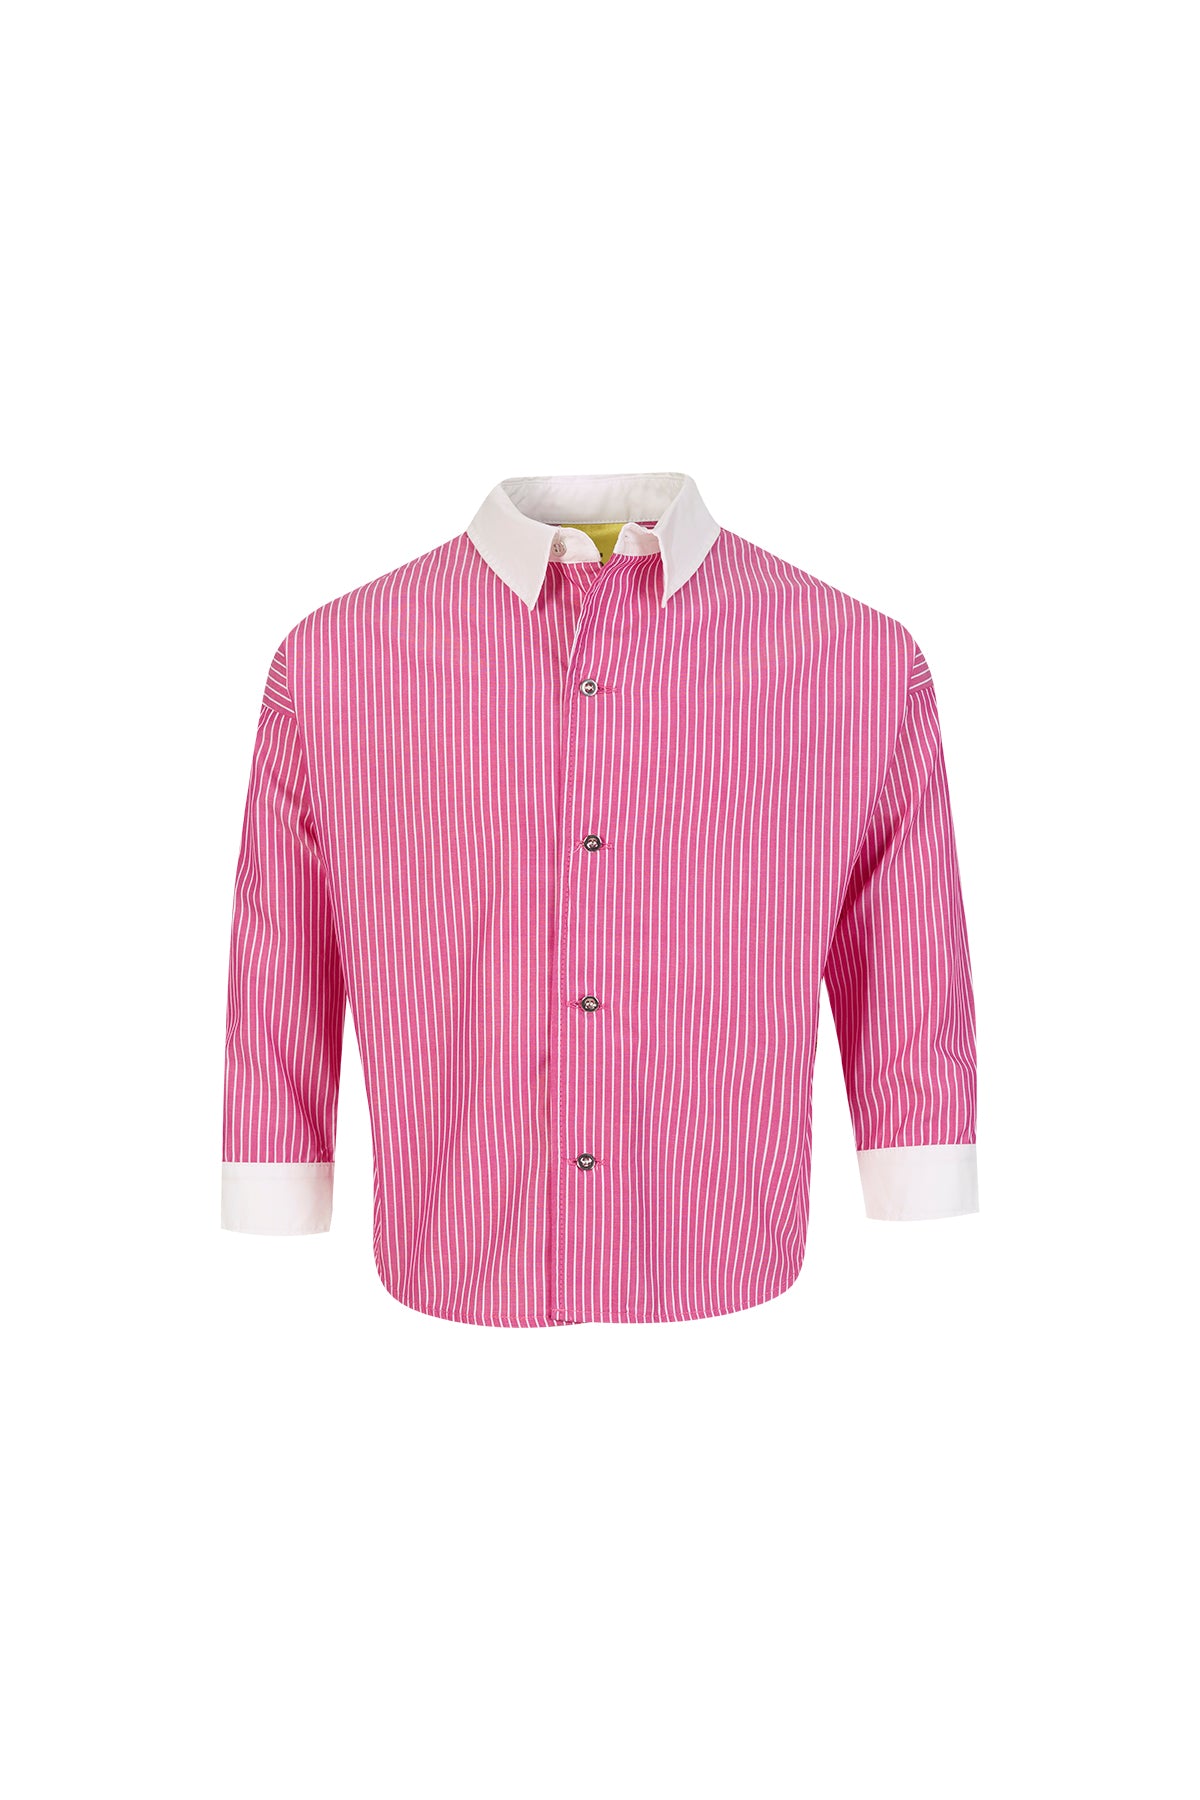 PINK AND WHITE STRIPED LOOSE SHIRT makids